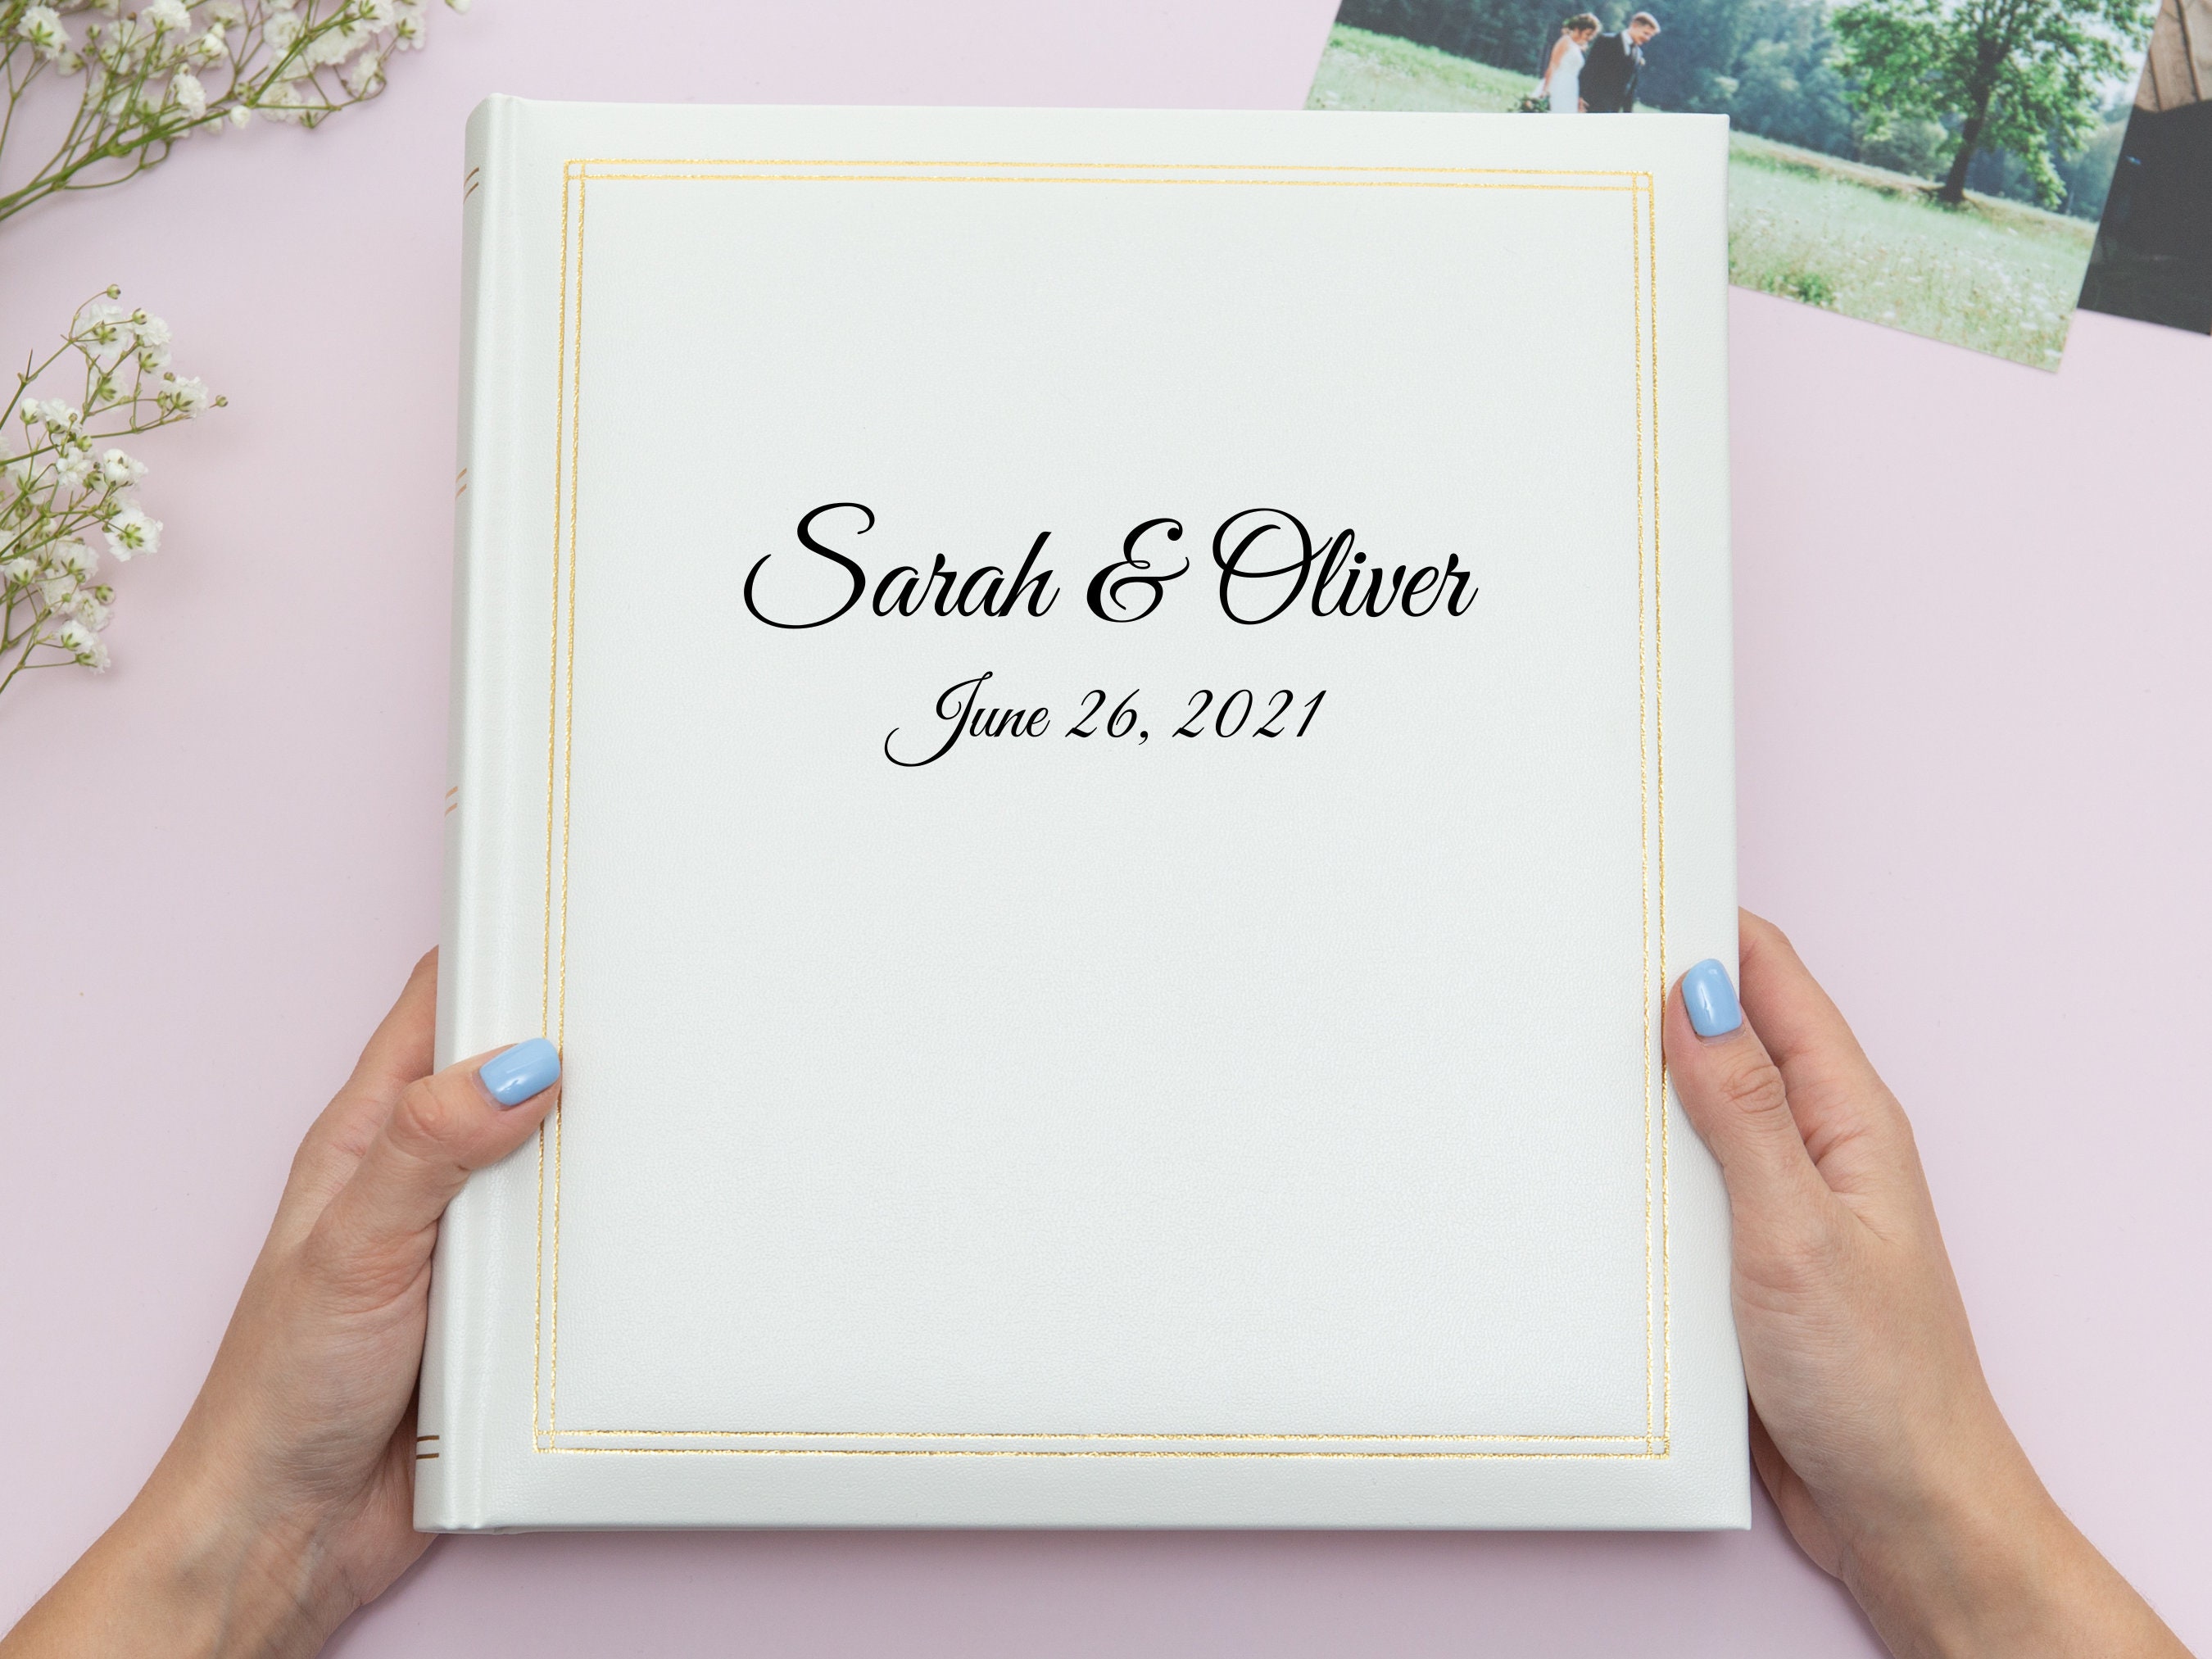 Photo Album 3x3.5 4x4.8 300 Photos PU leather Hardcover Large Capacity for  Family Wedding Anniversary Baby travel Vacation 